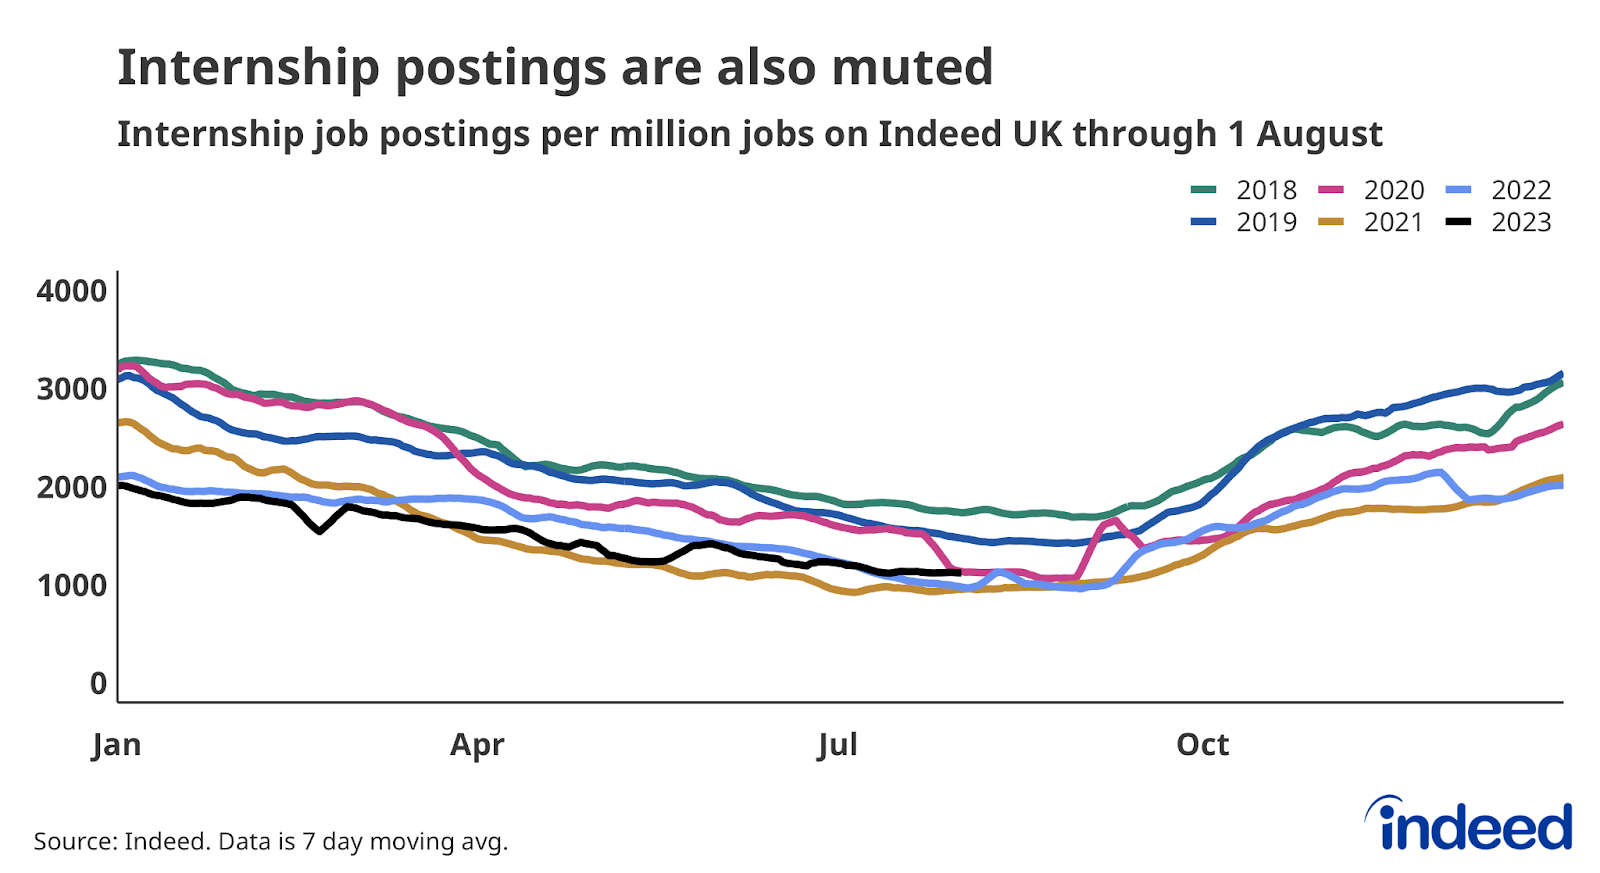 A line chart titled “Internship postings are also muted” showing the trend in internship job postings per million over the past six years. The share of internship postings is running below where it was in the pre-pandemic years of 2018 and 2019. 